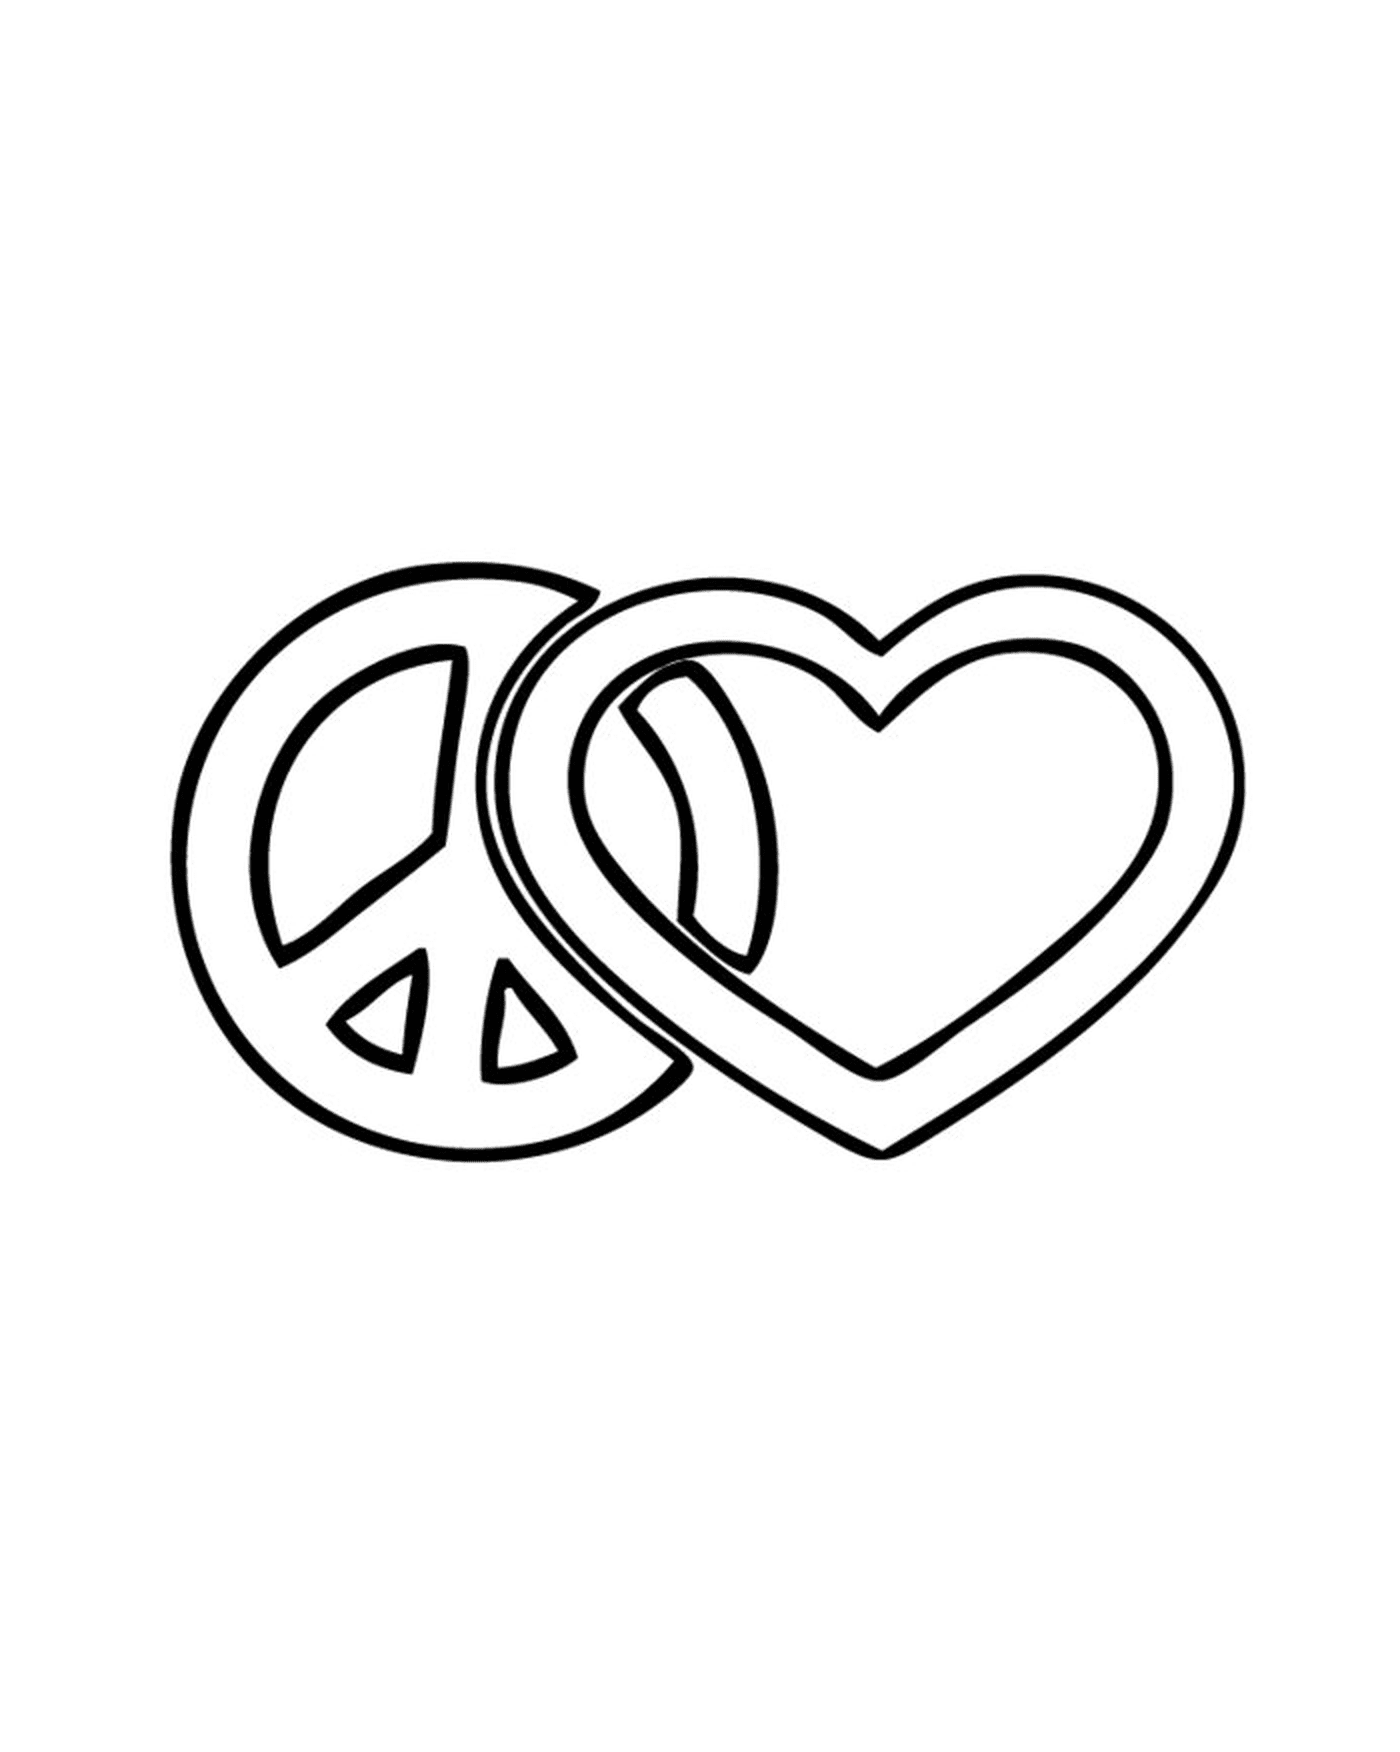  A heart drawn with peace 